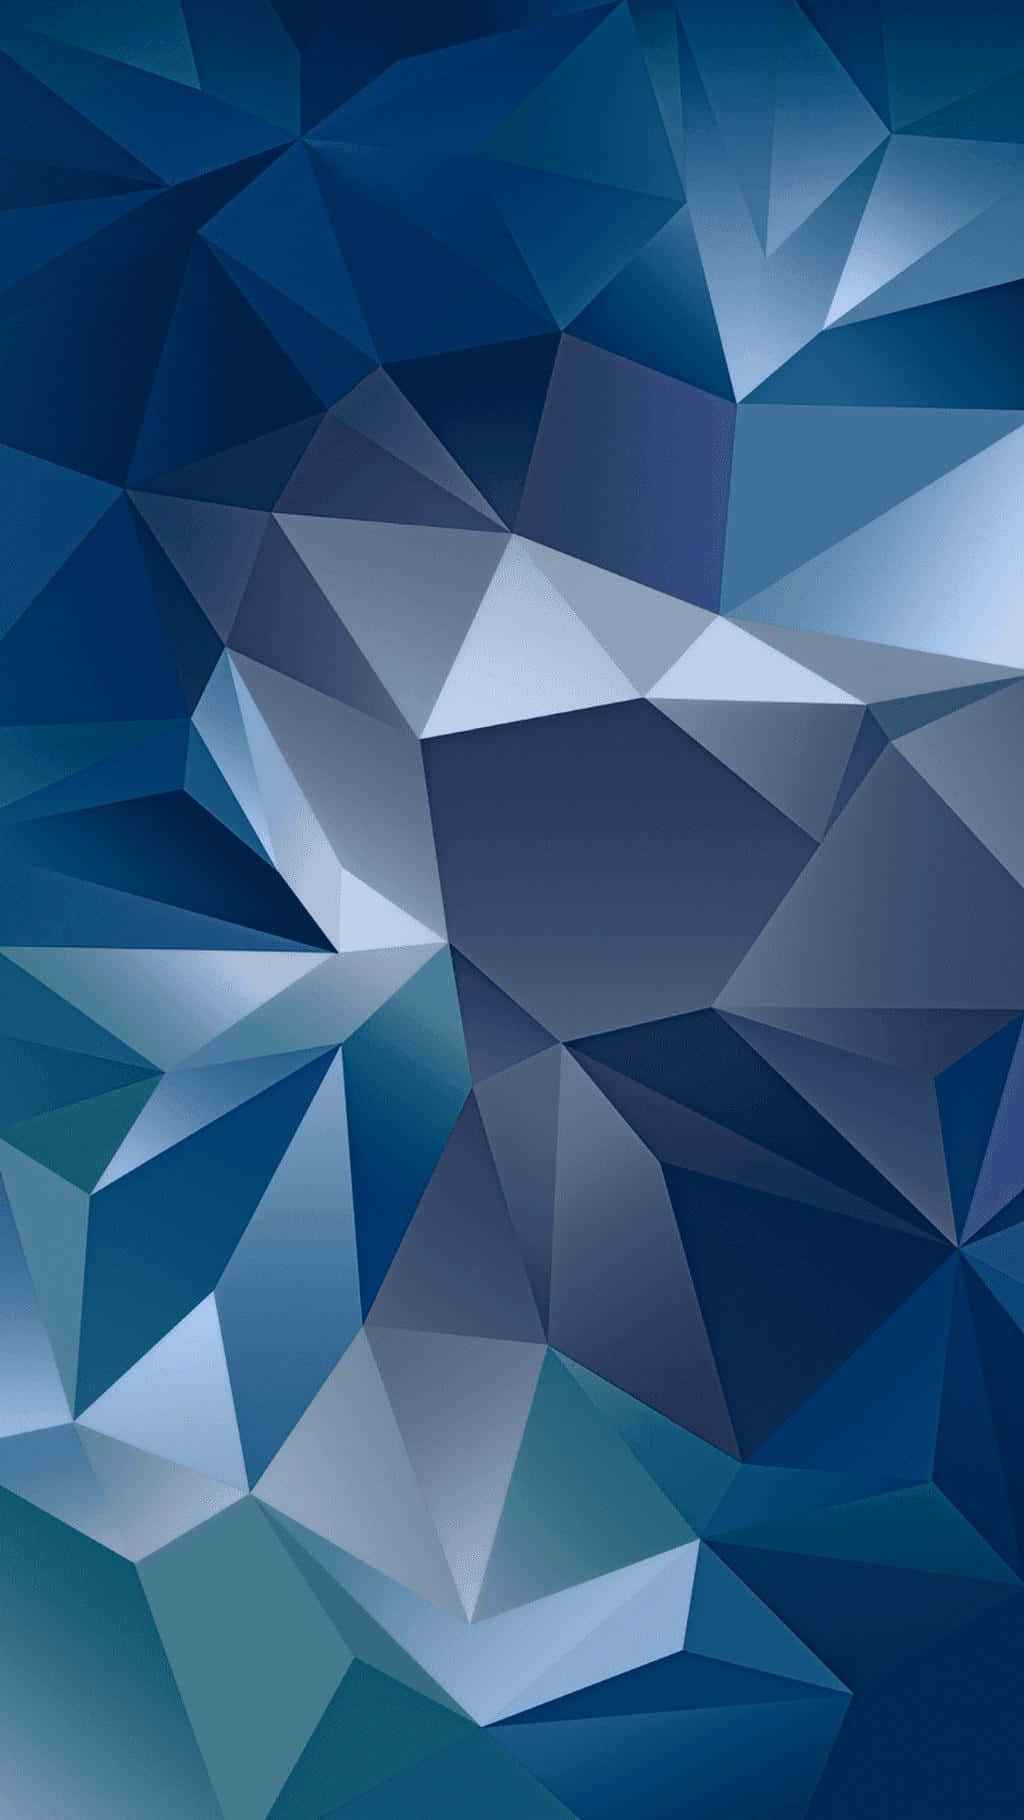 Cool blue abstract design